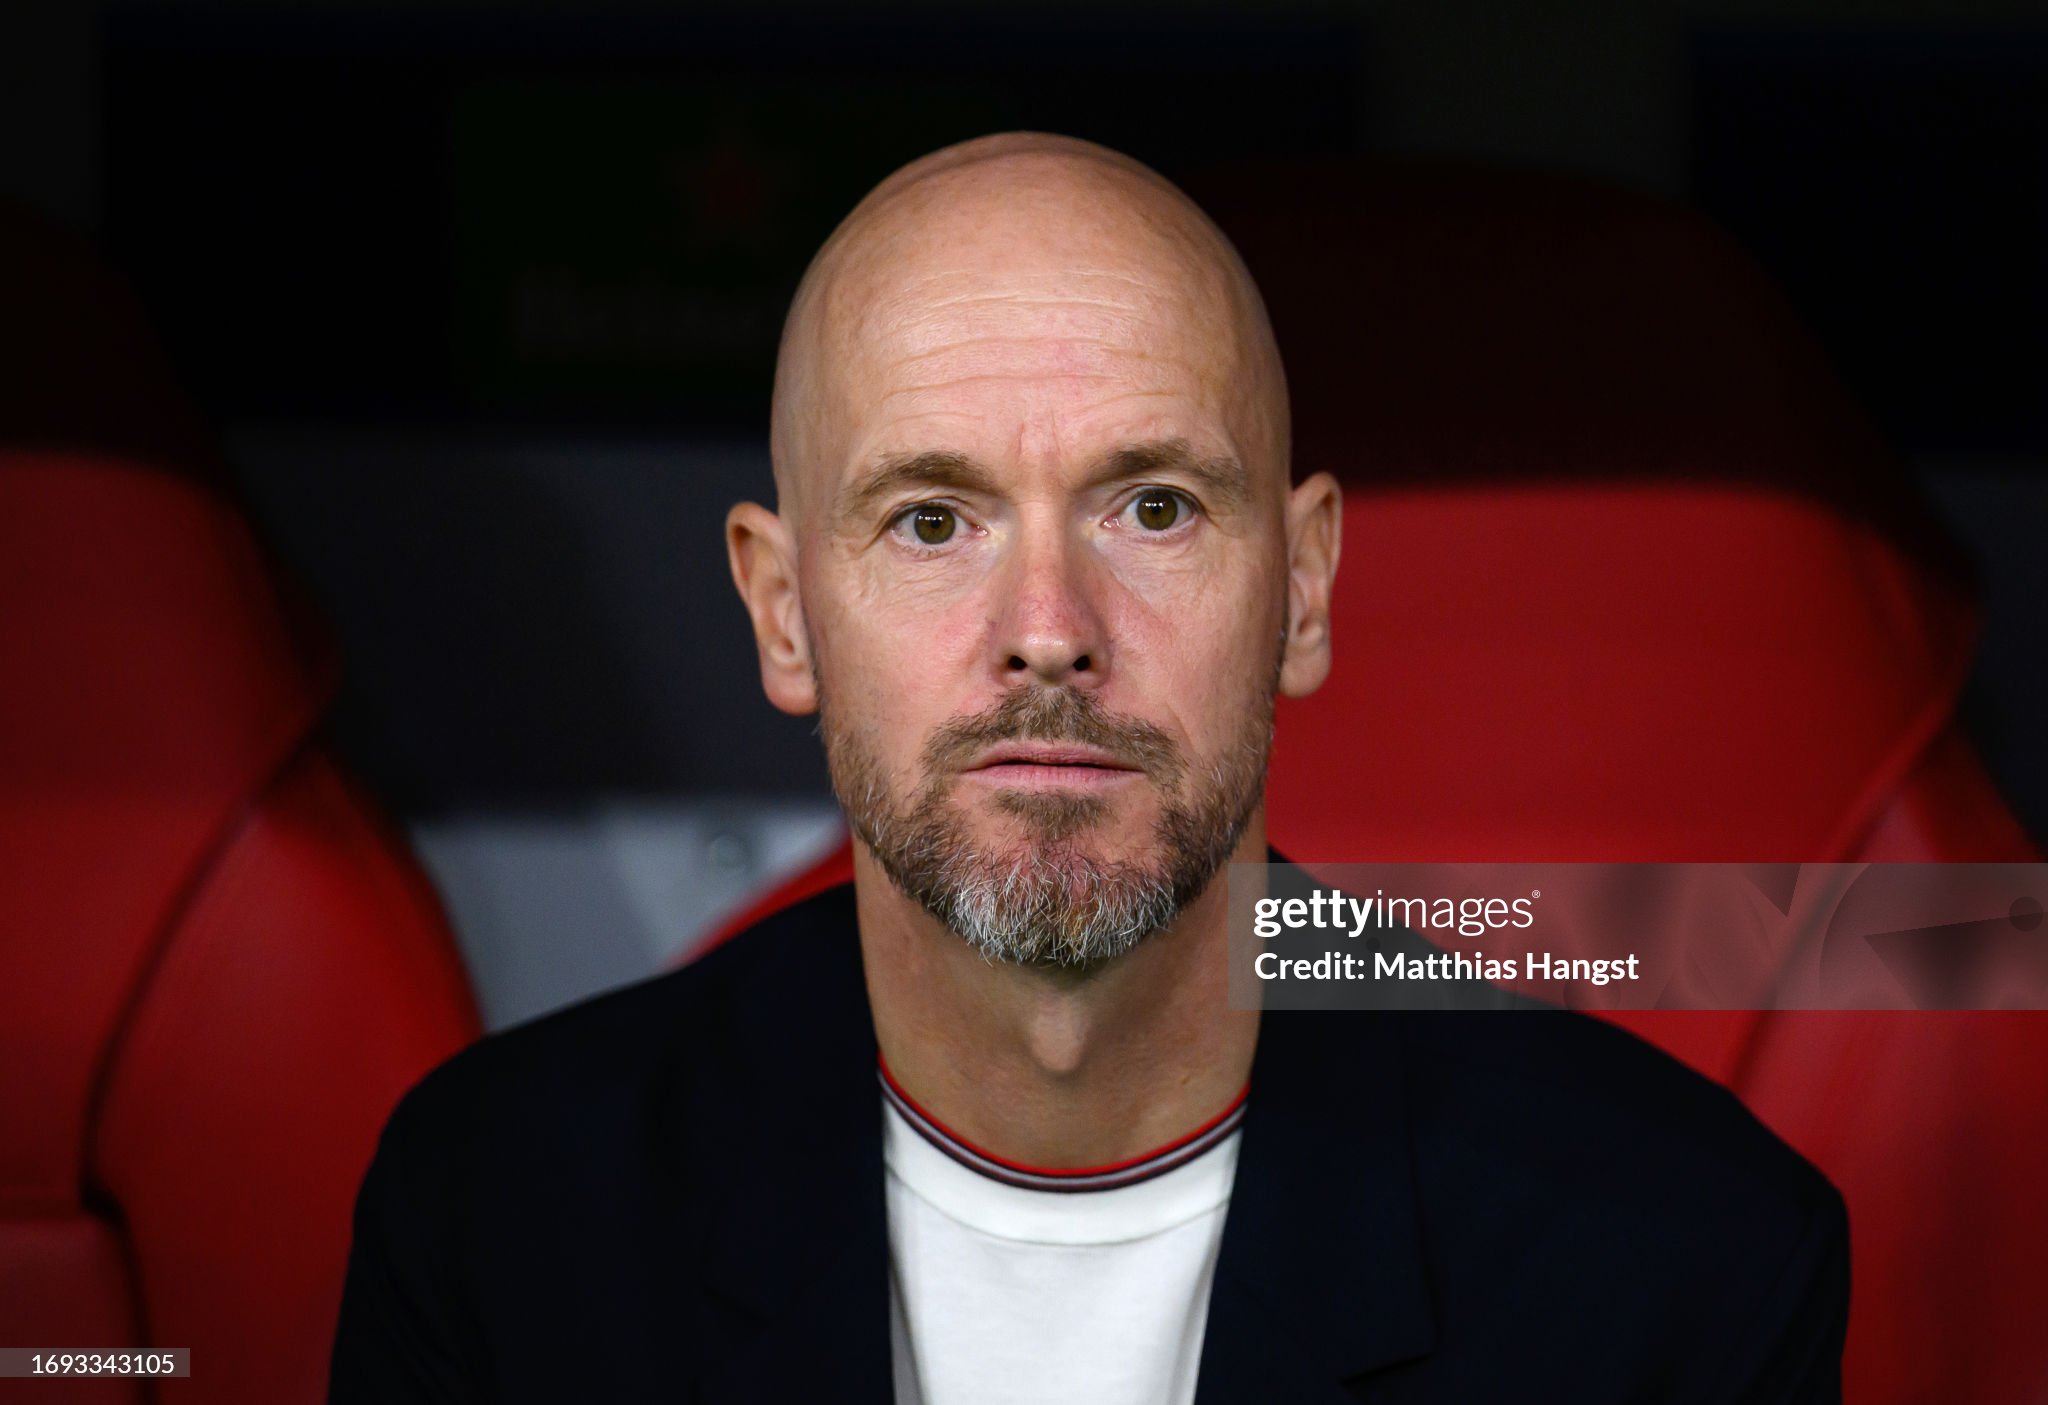 Ten Hag reflects on the challenges of his 'second season'